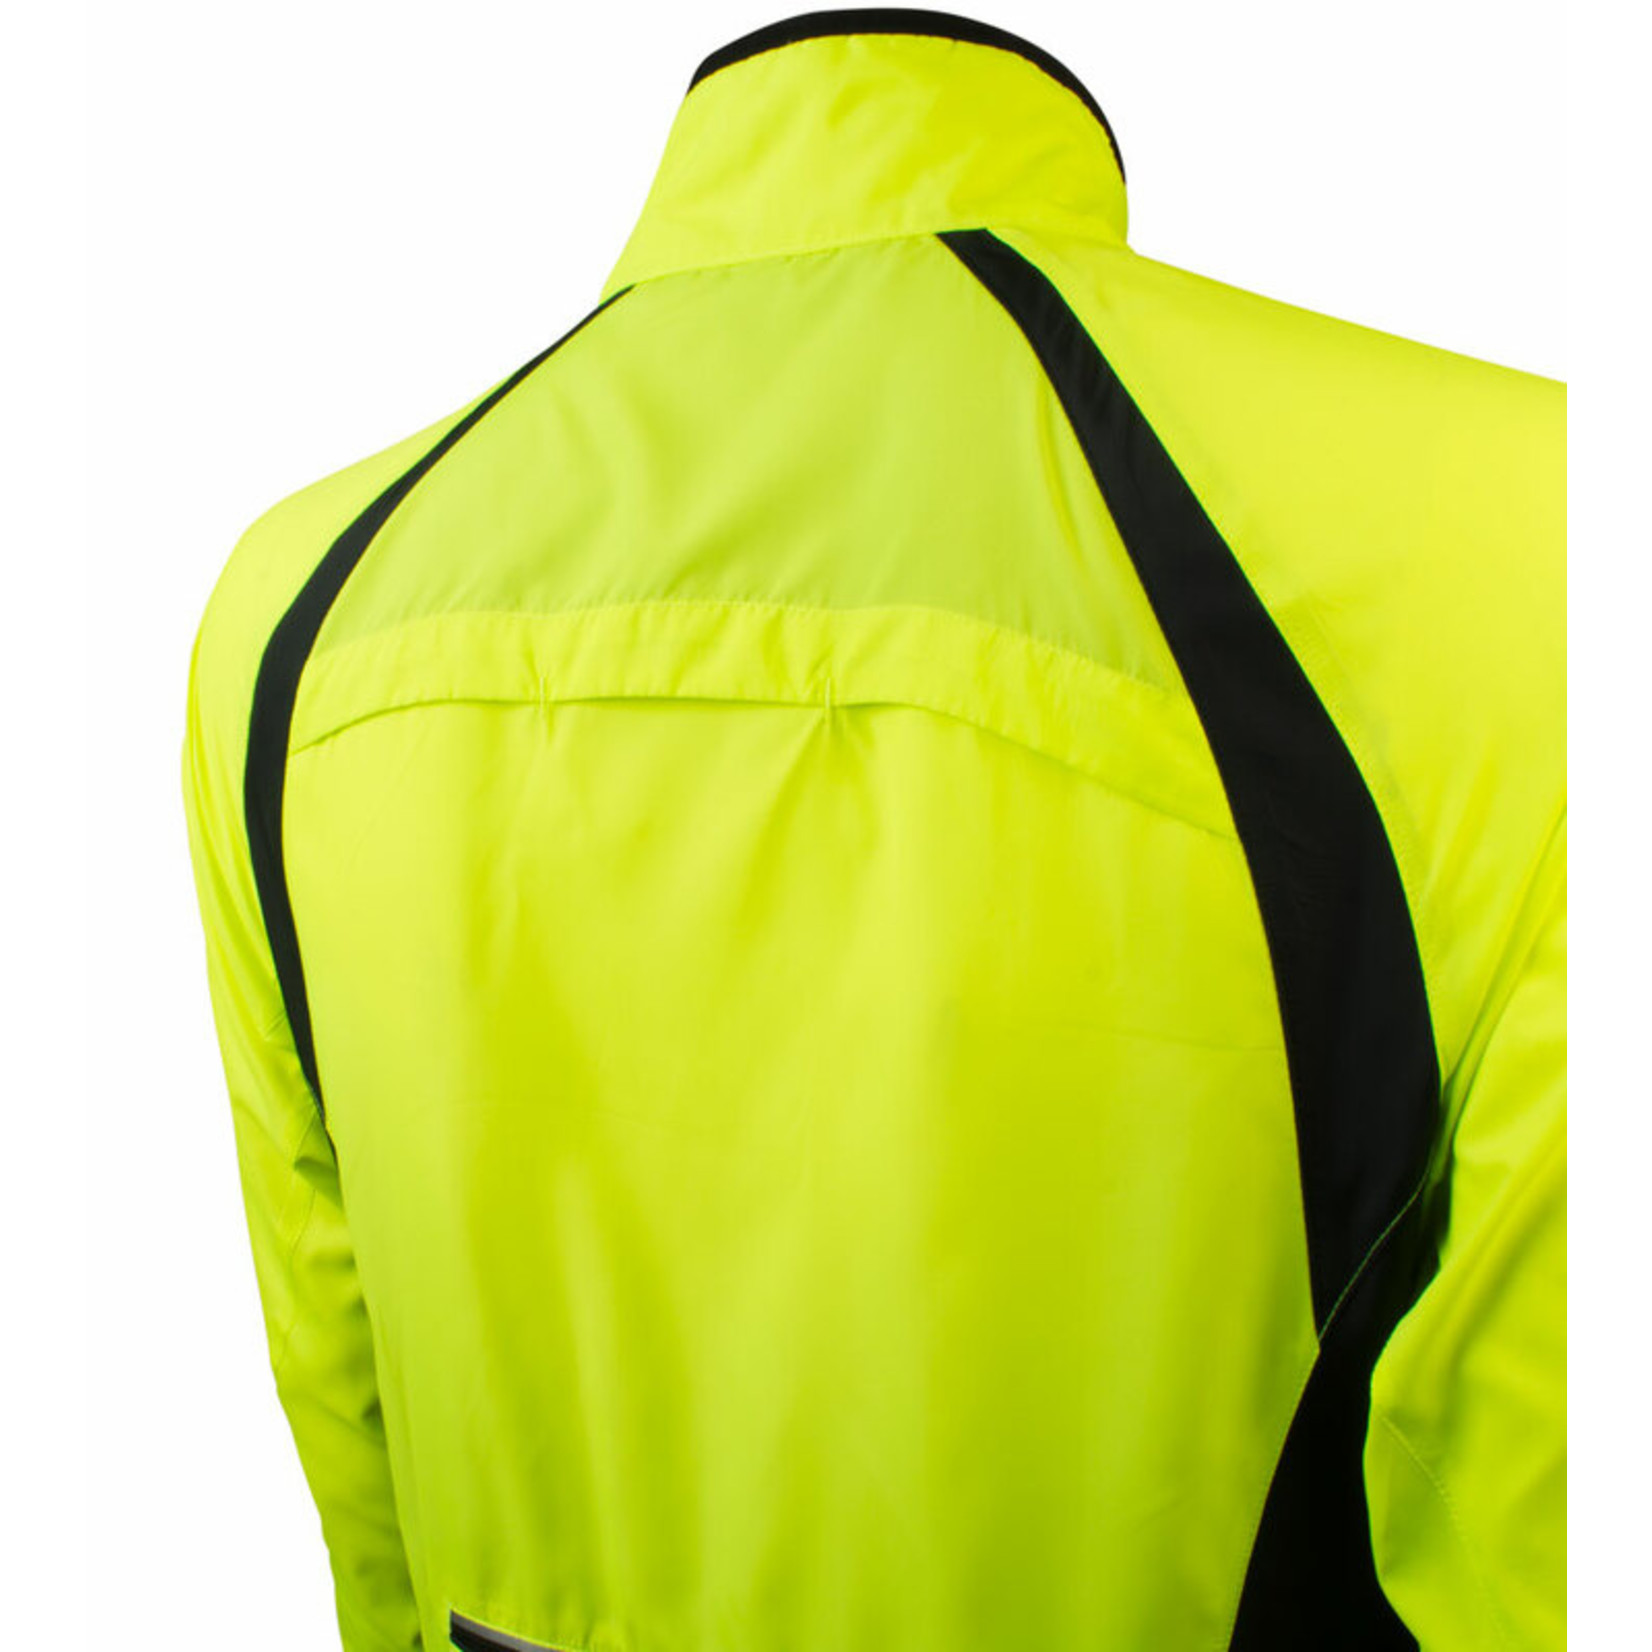 Aero Tech Men's Windproof Packable Safety Jacket - High Visibility Windbreaker